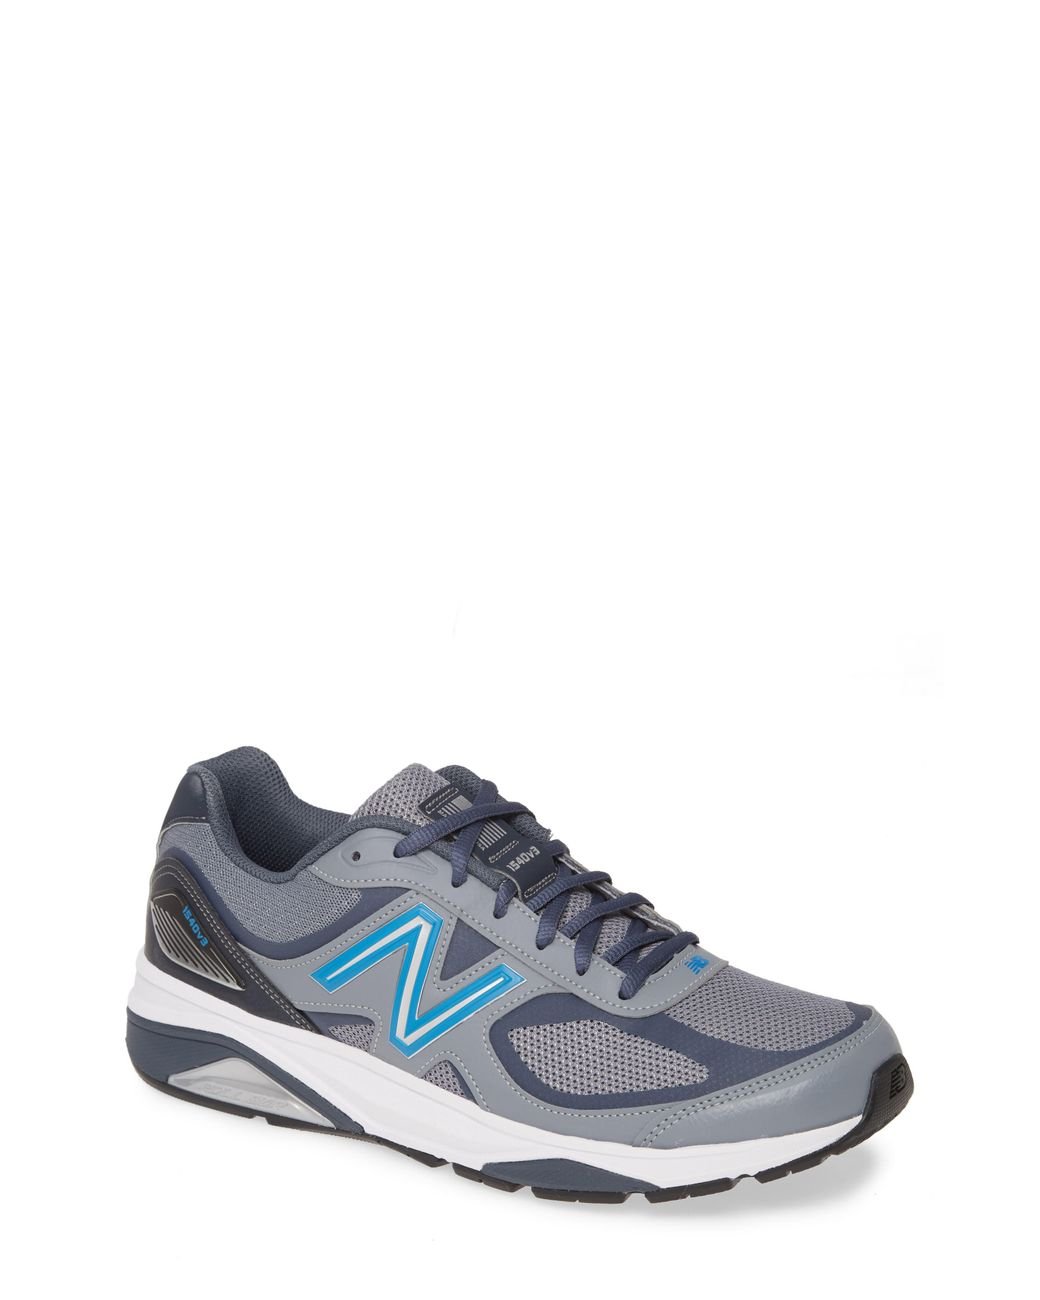 New Balance Rubber Made In Us 1540v3 Running Shoe in Blue for Men - Lyst